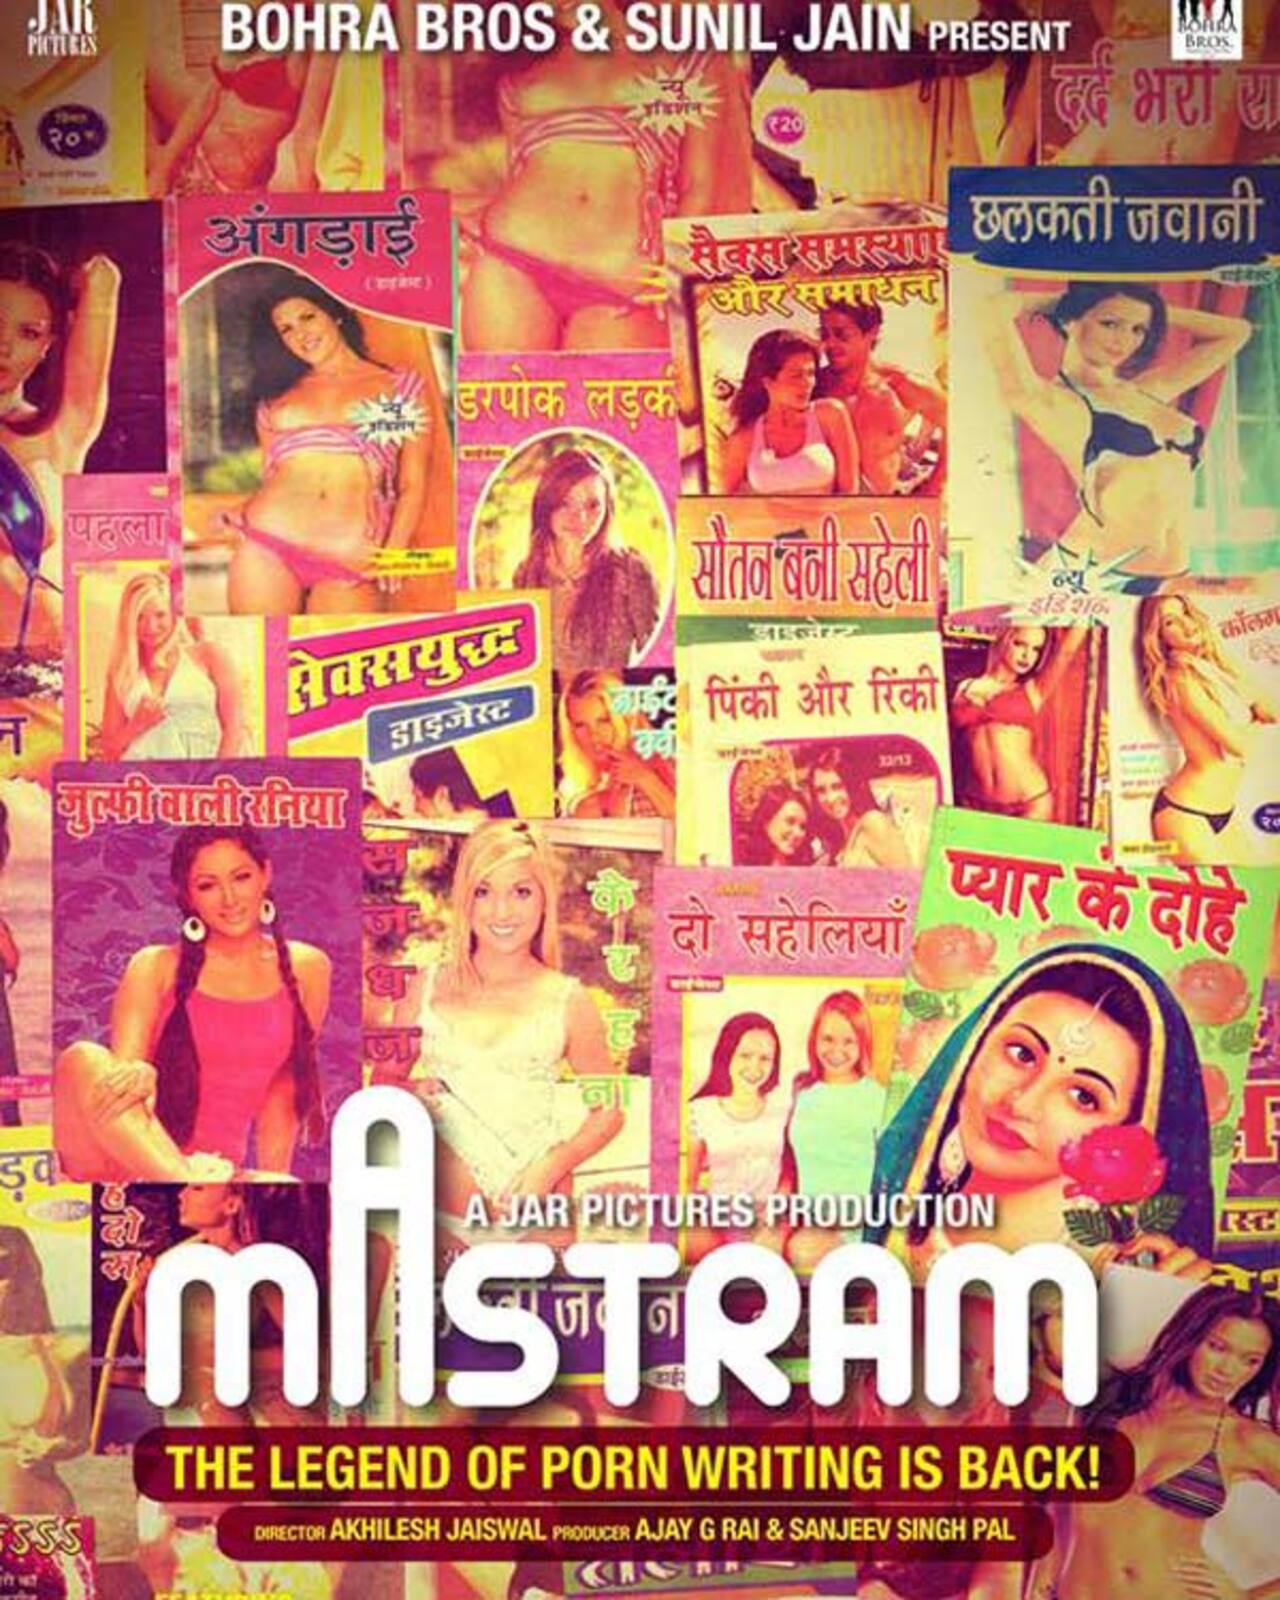 Mastram quick movie review: Akhilesh Jaiswal's film titillates, but doesn't engage!